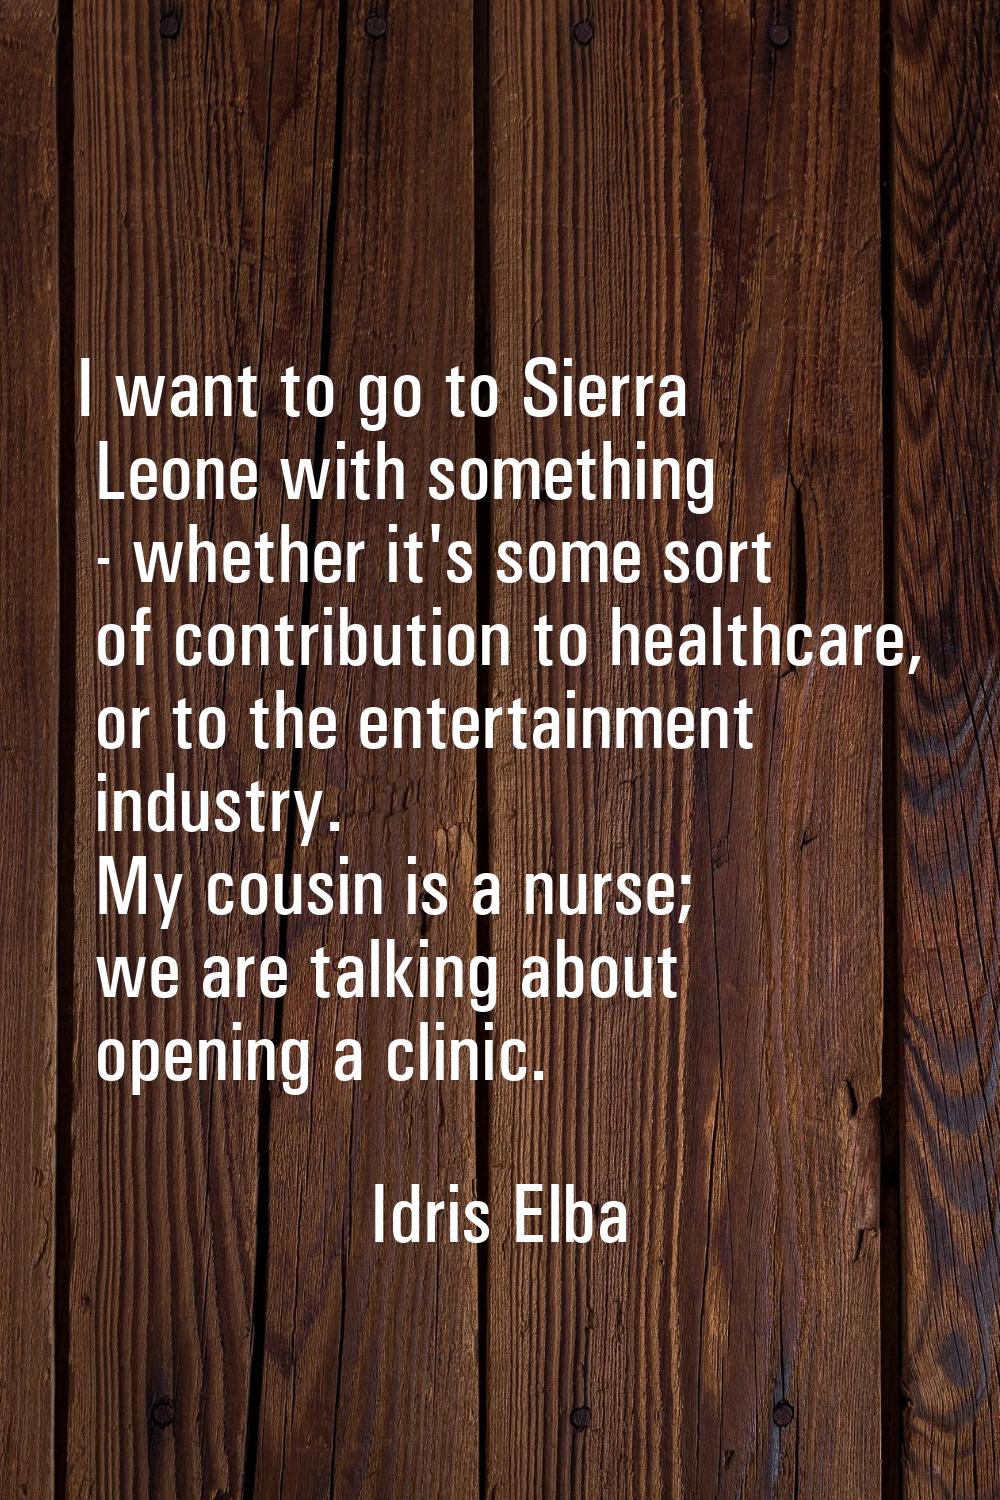 I want to go to Sierra Leone with something - whether it's some sort of contribution to healthcare,